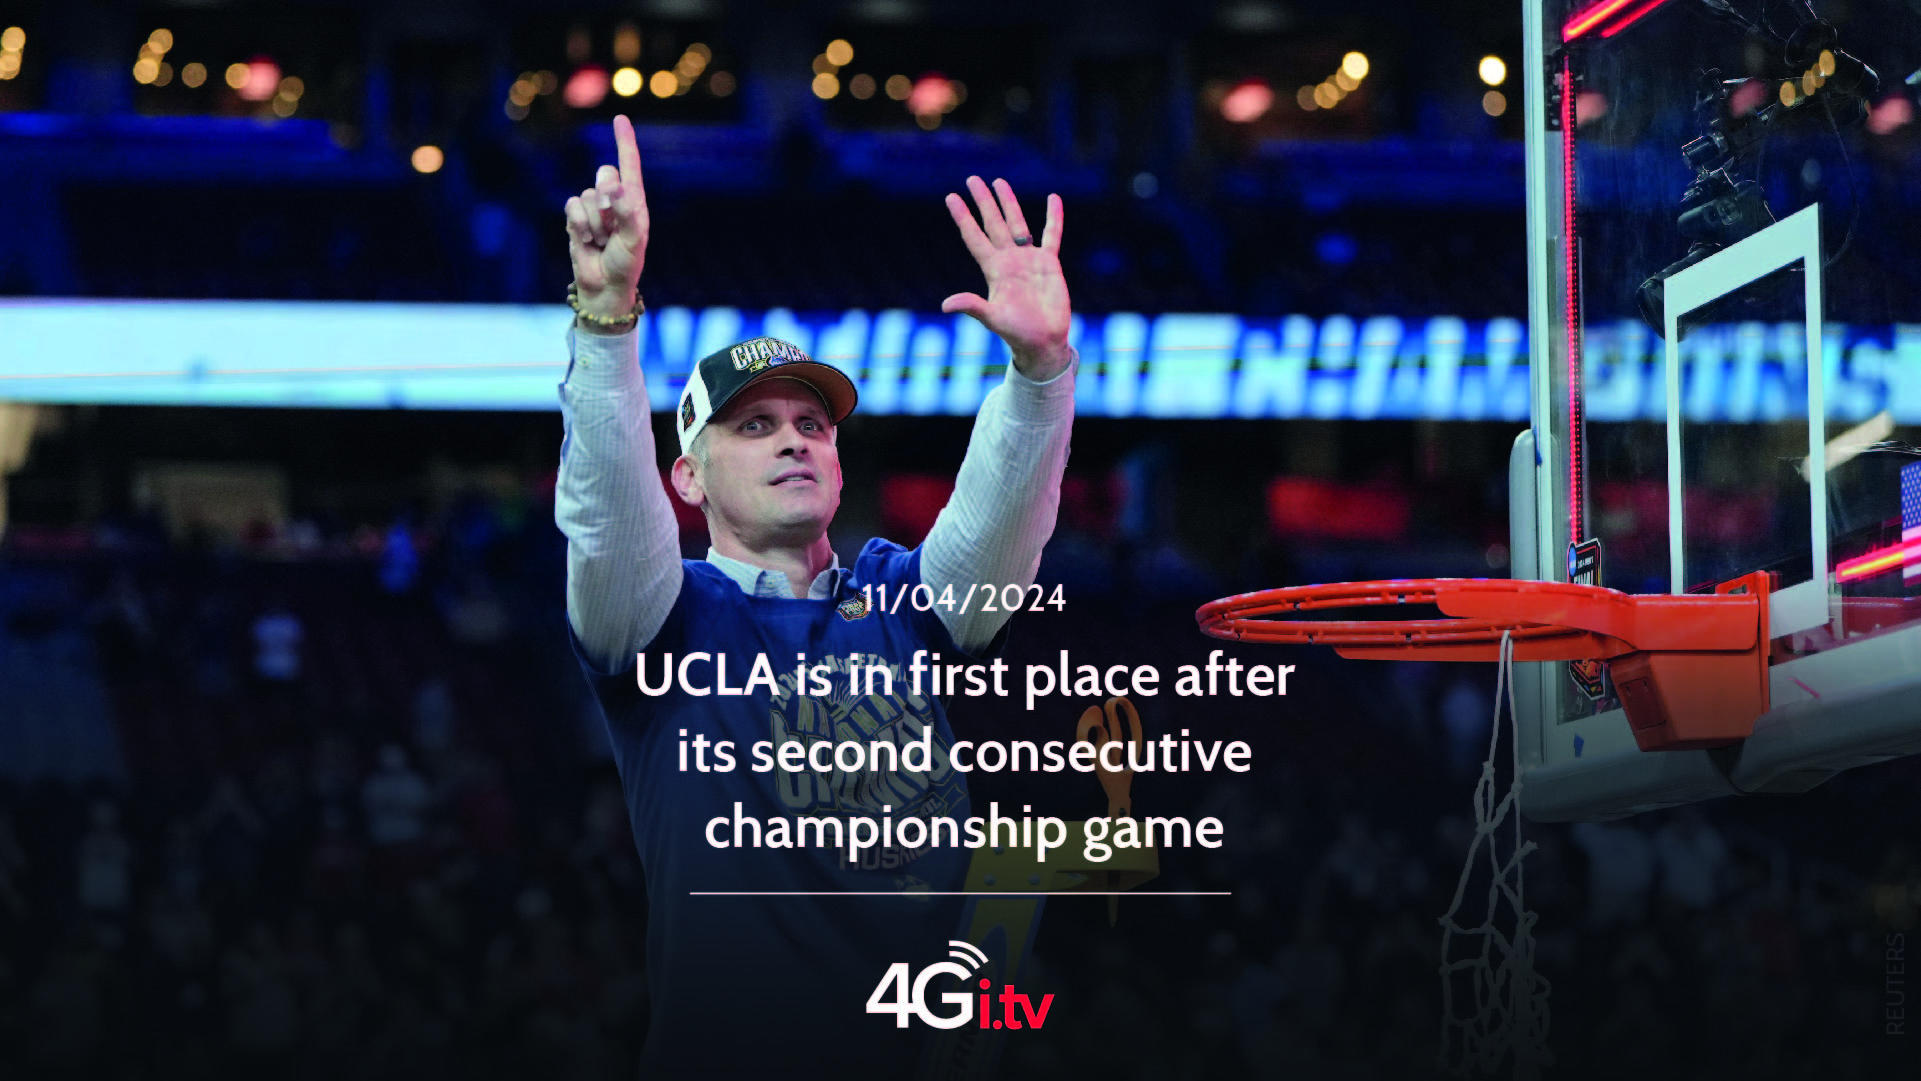 Lesen Sie mehr über den Artikel UCLA is in first place after its second consecutive championship game